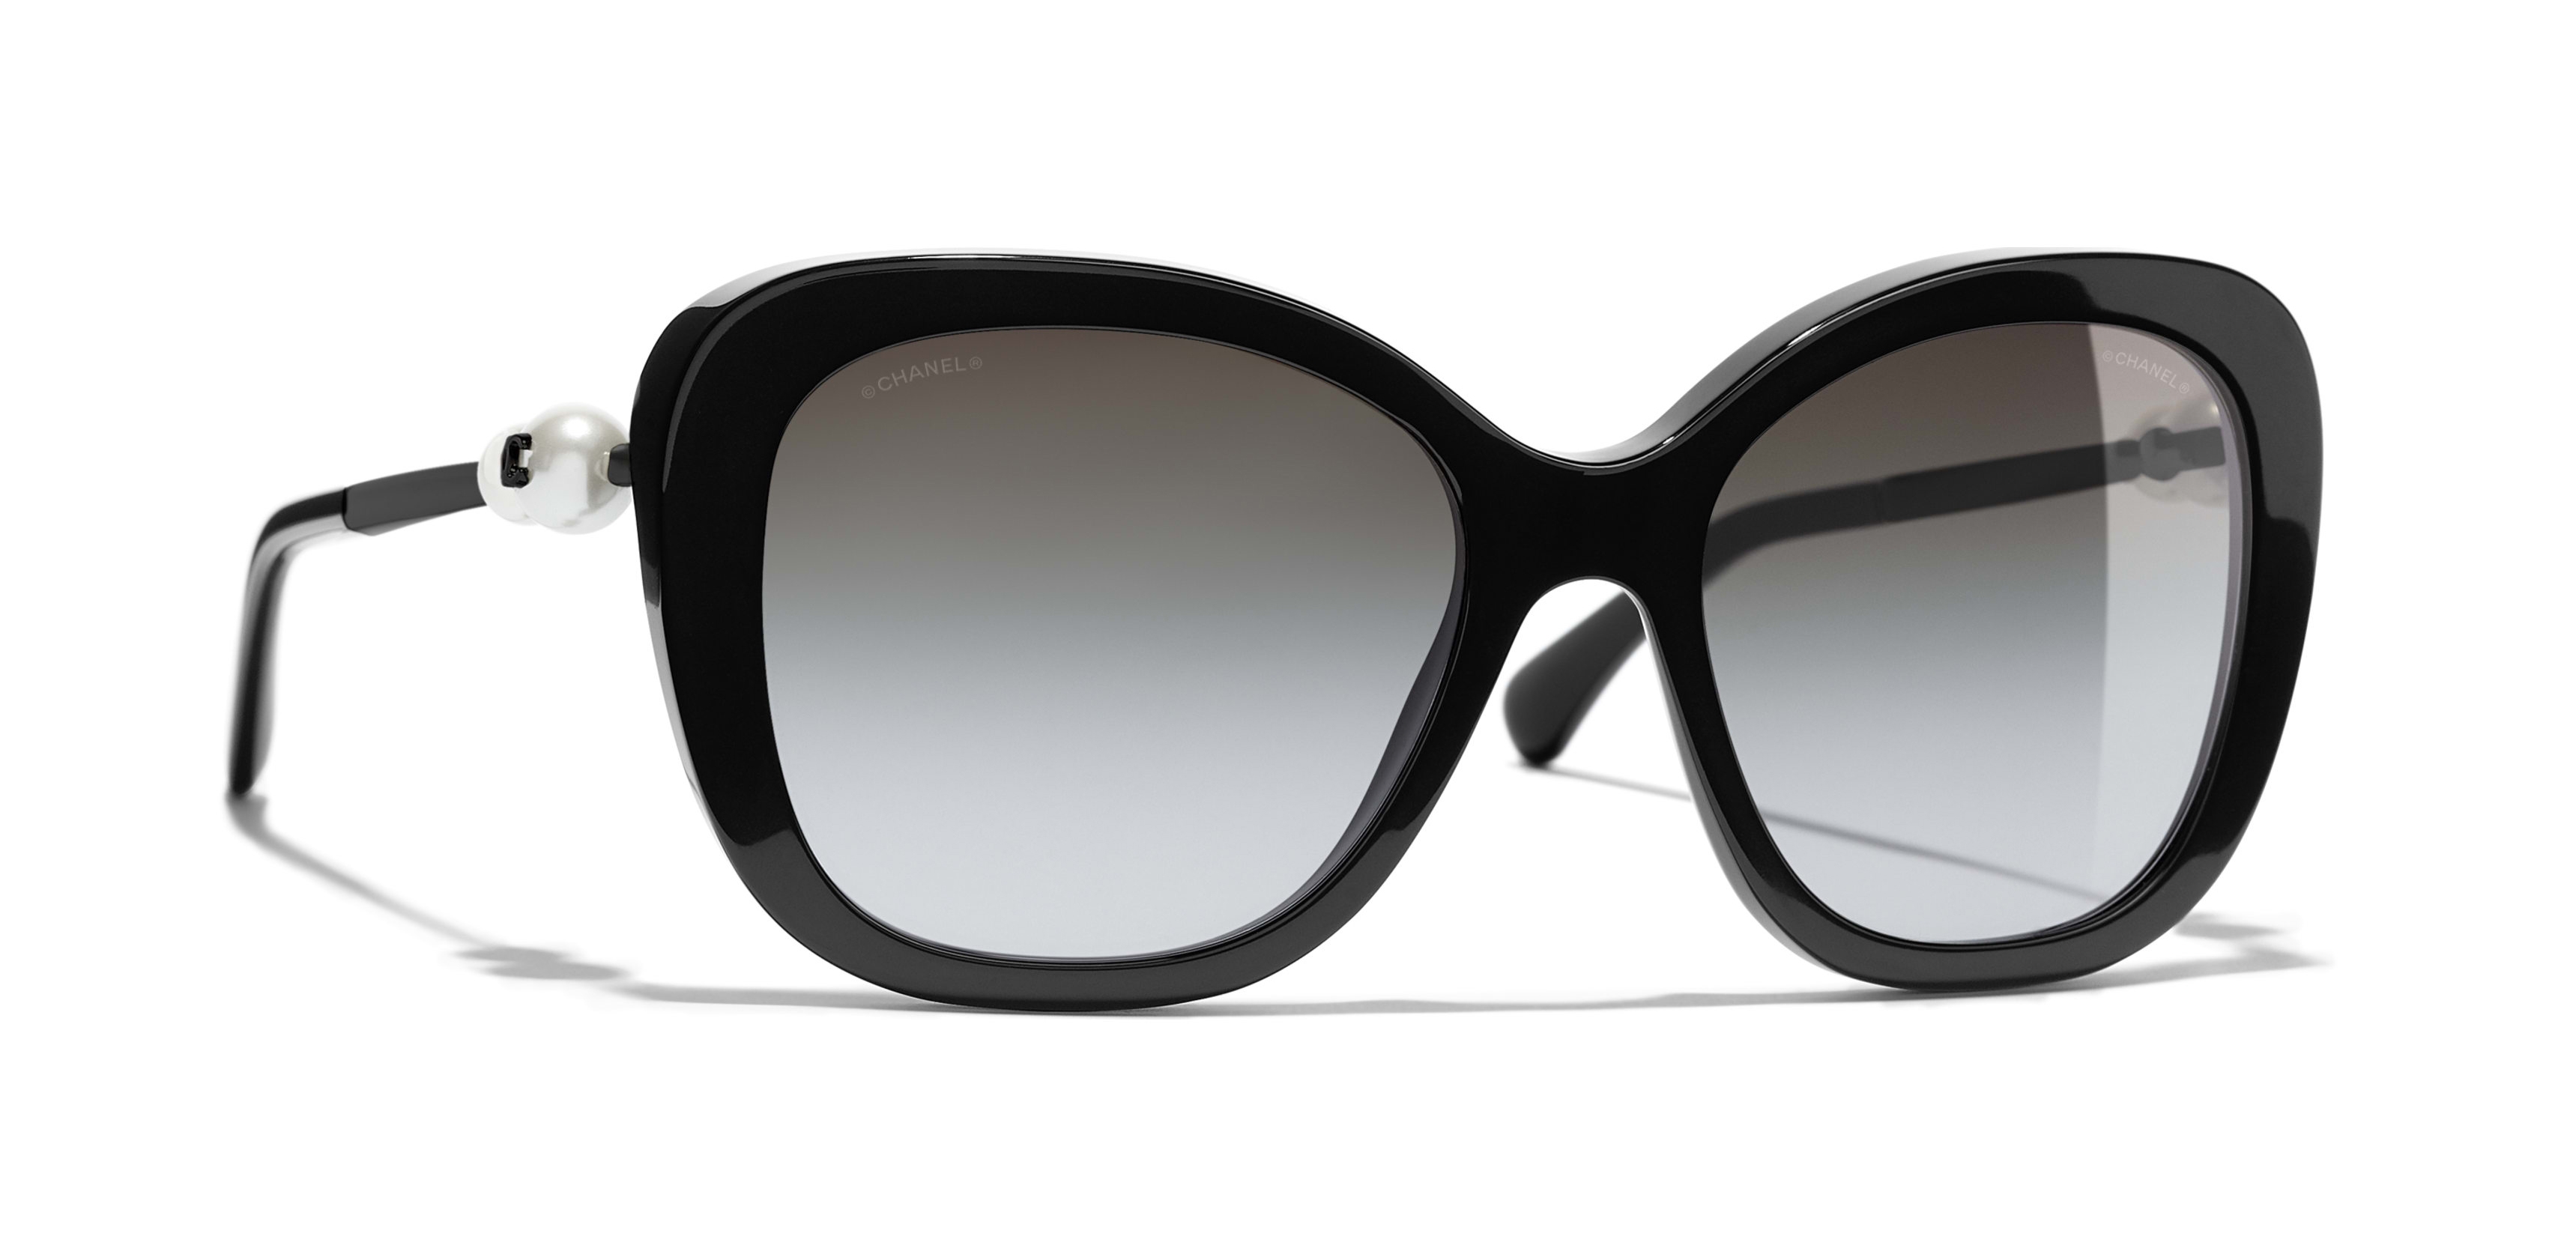 Best Chanel Collection Perle Sunglasses for sale in Yorkville